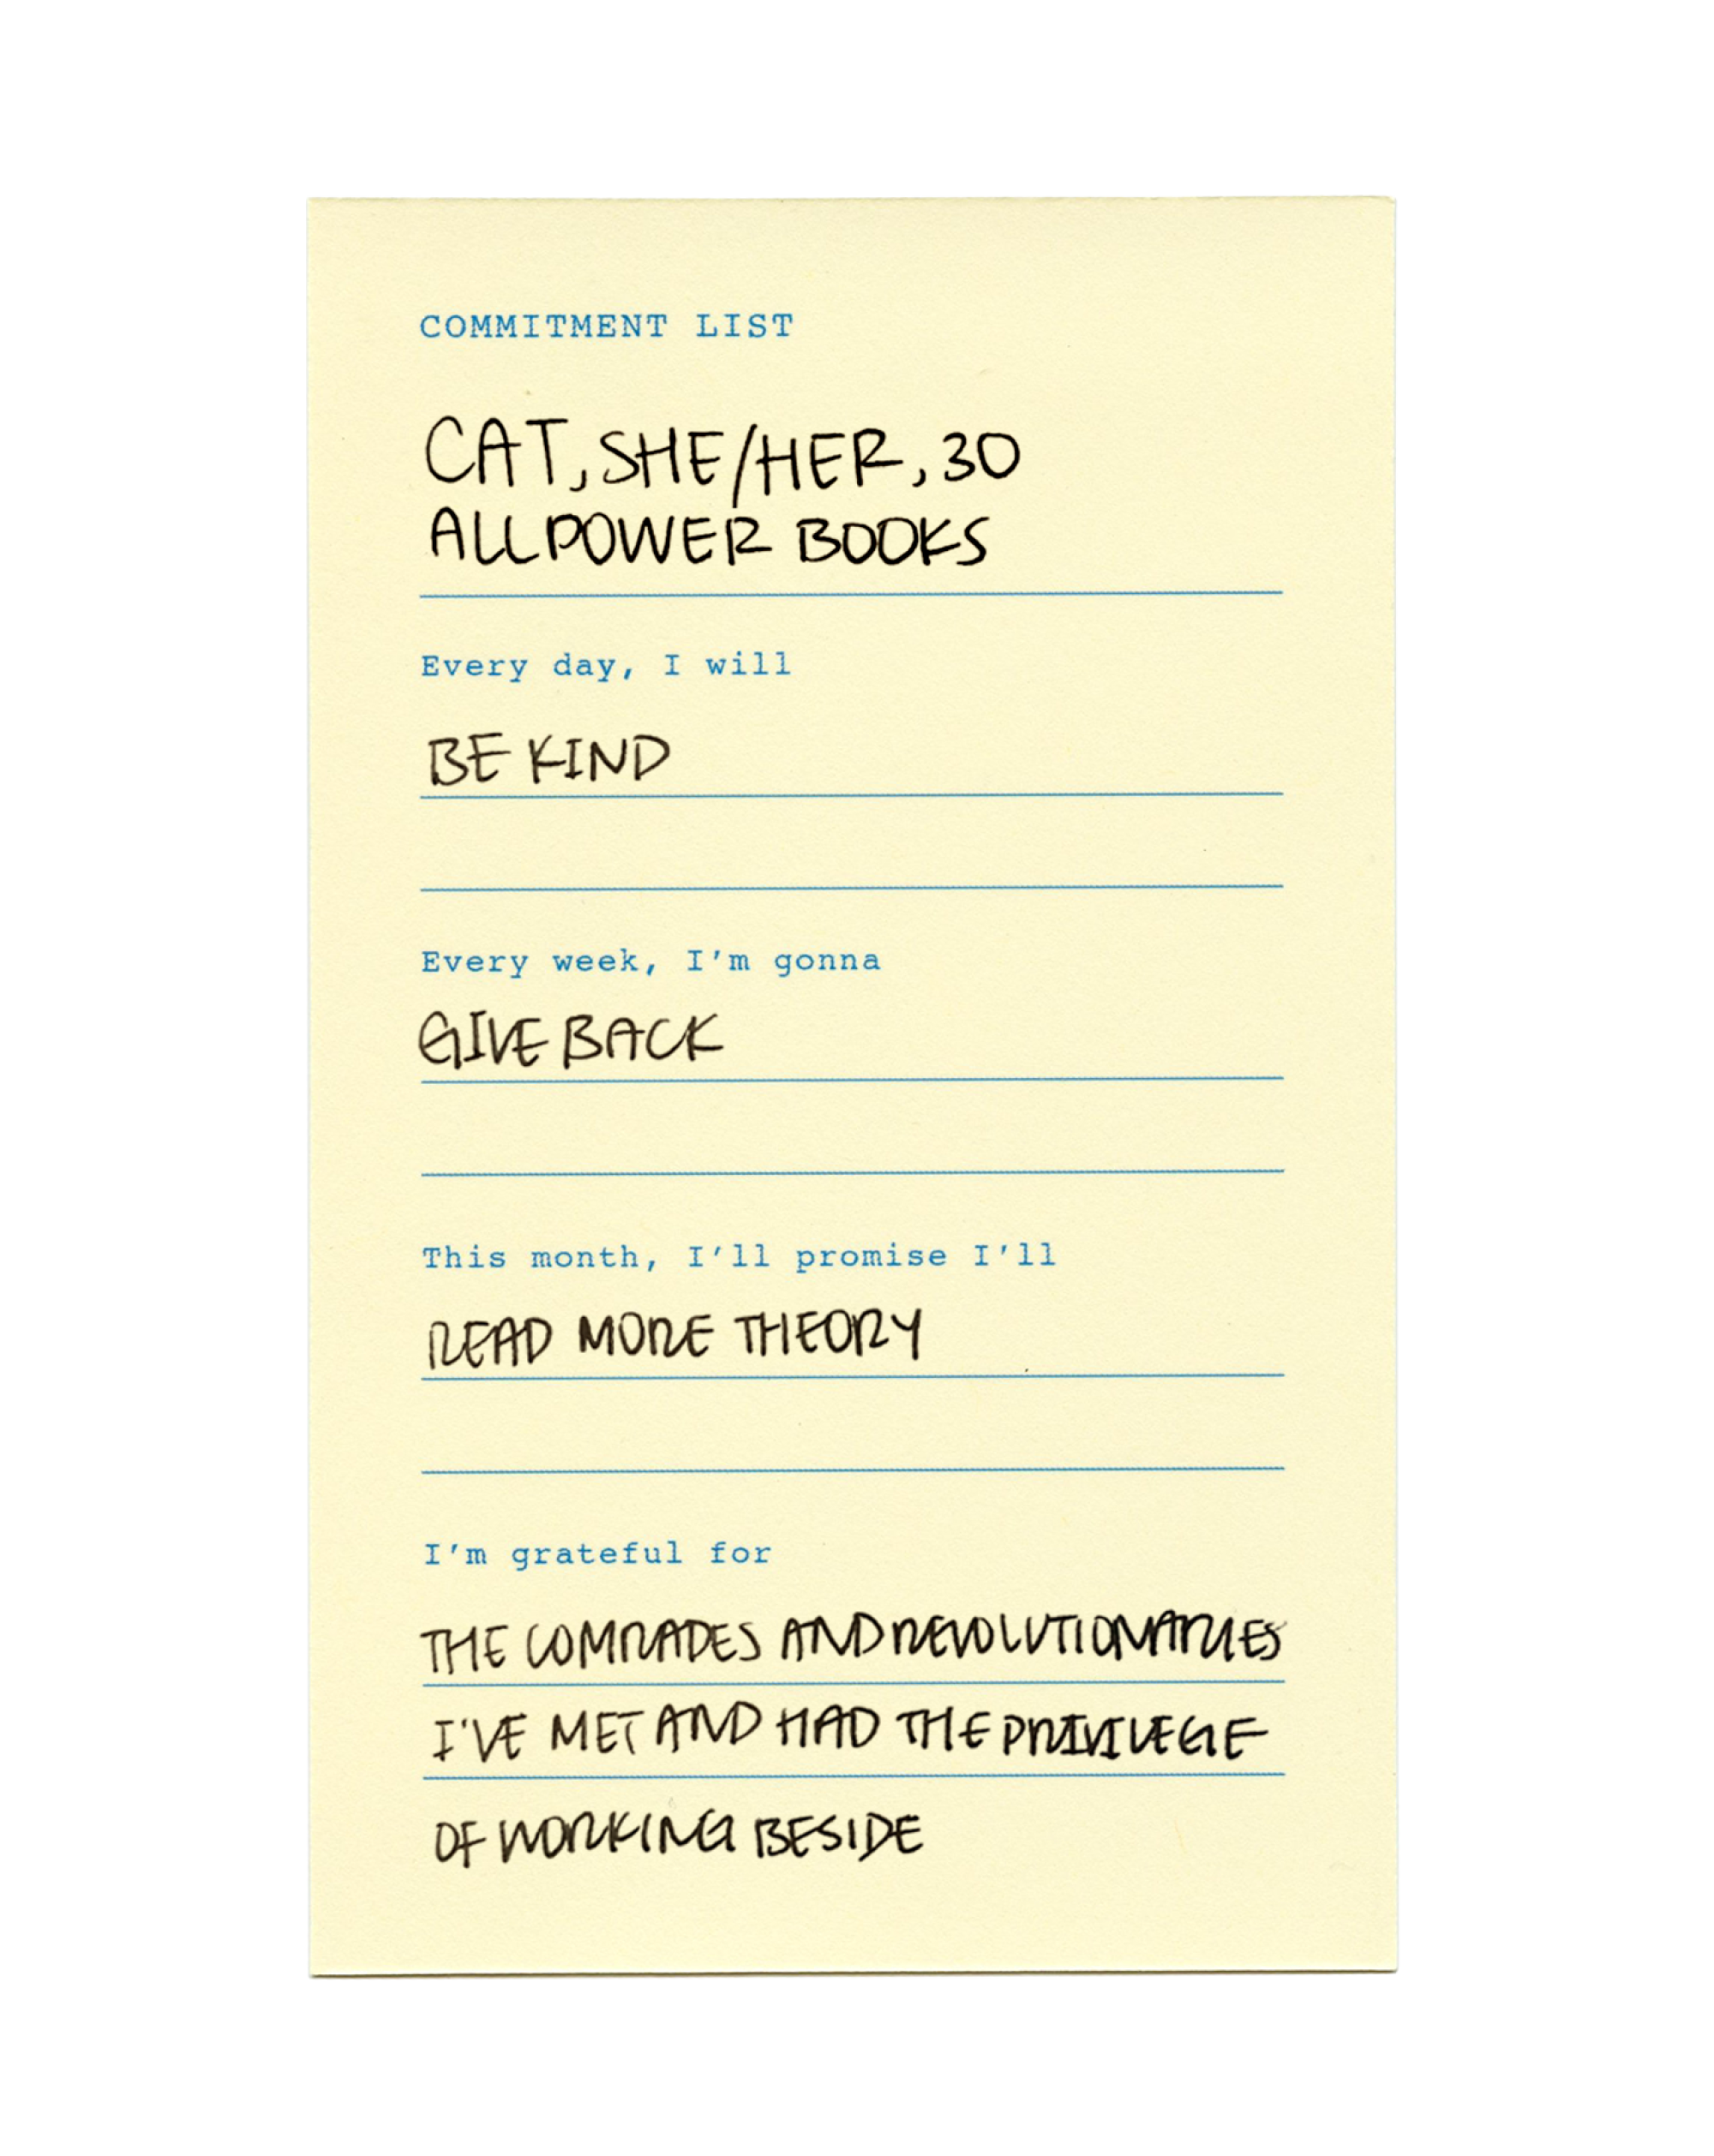 A commitment list from Cat at All Power Books includes an intention to read more theory.